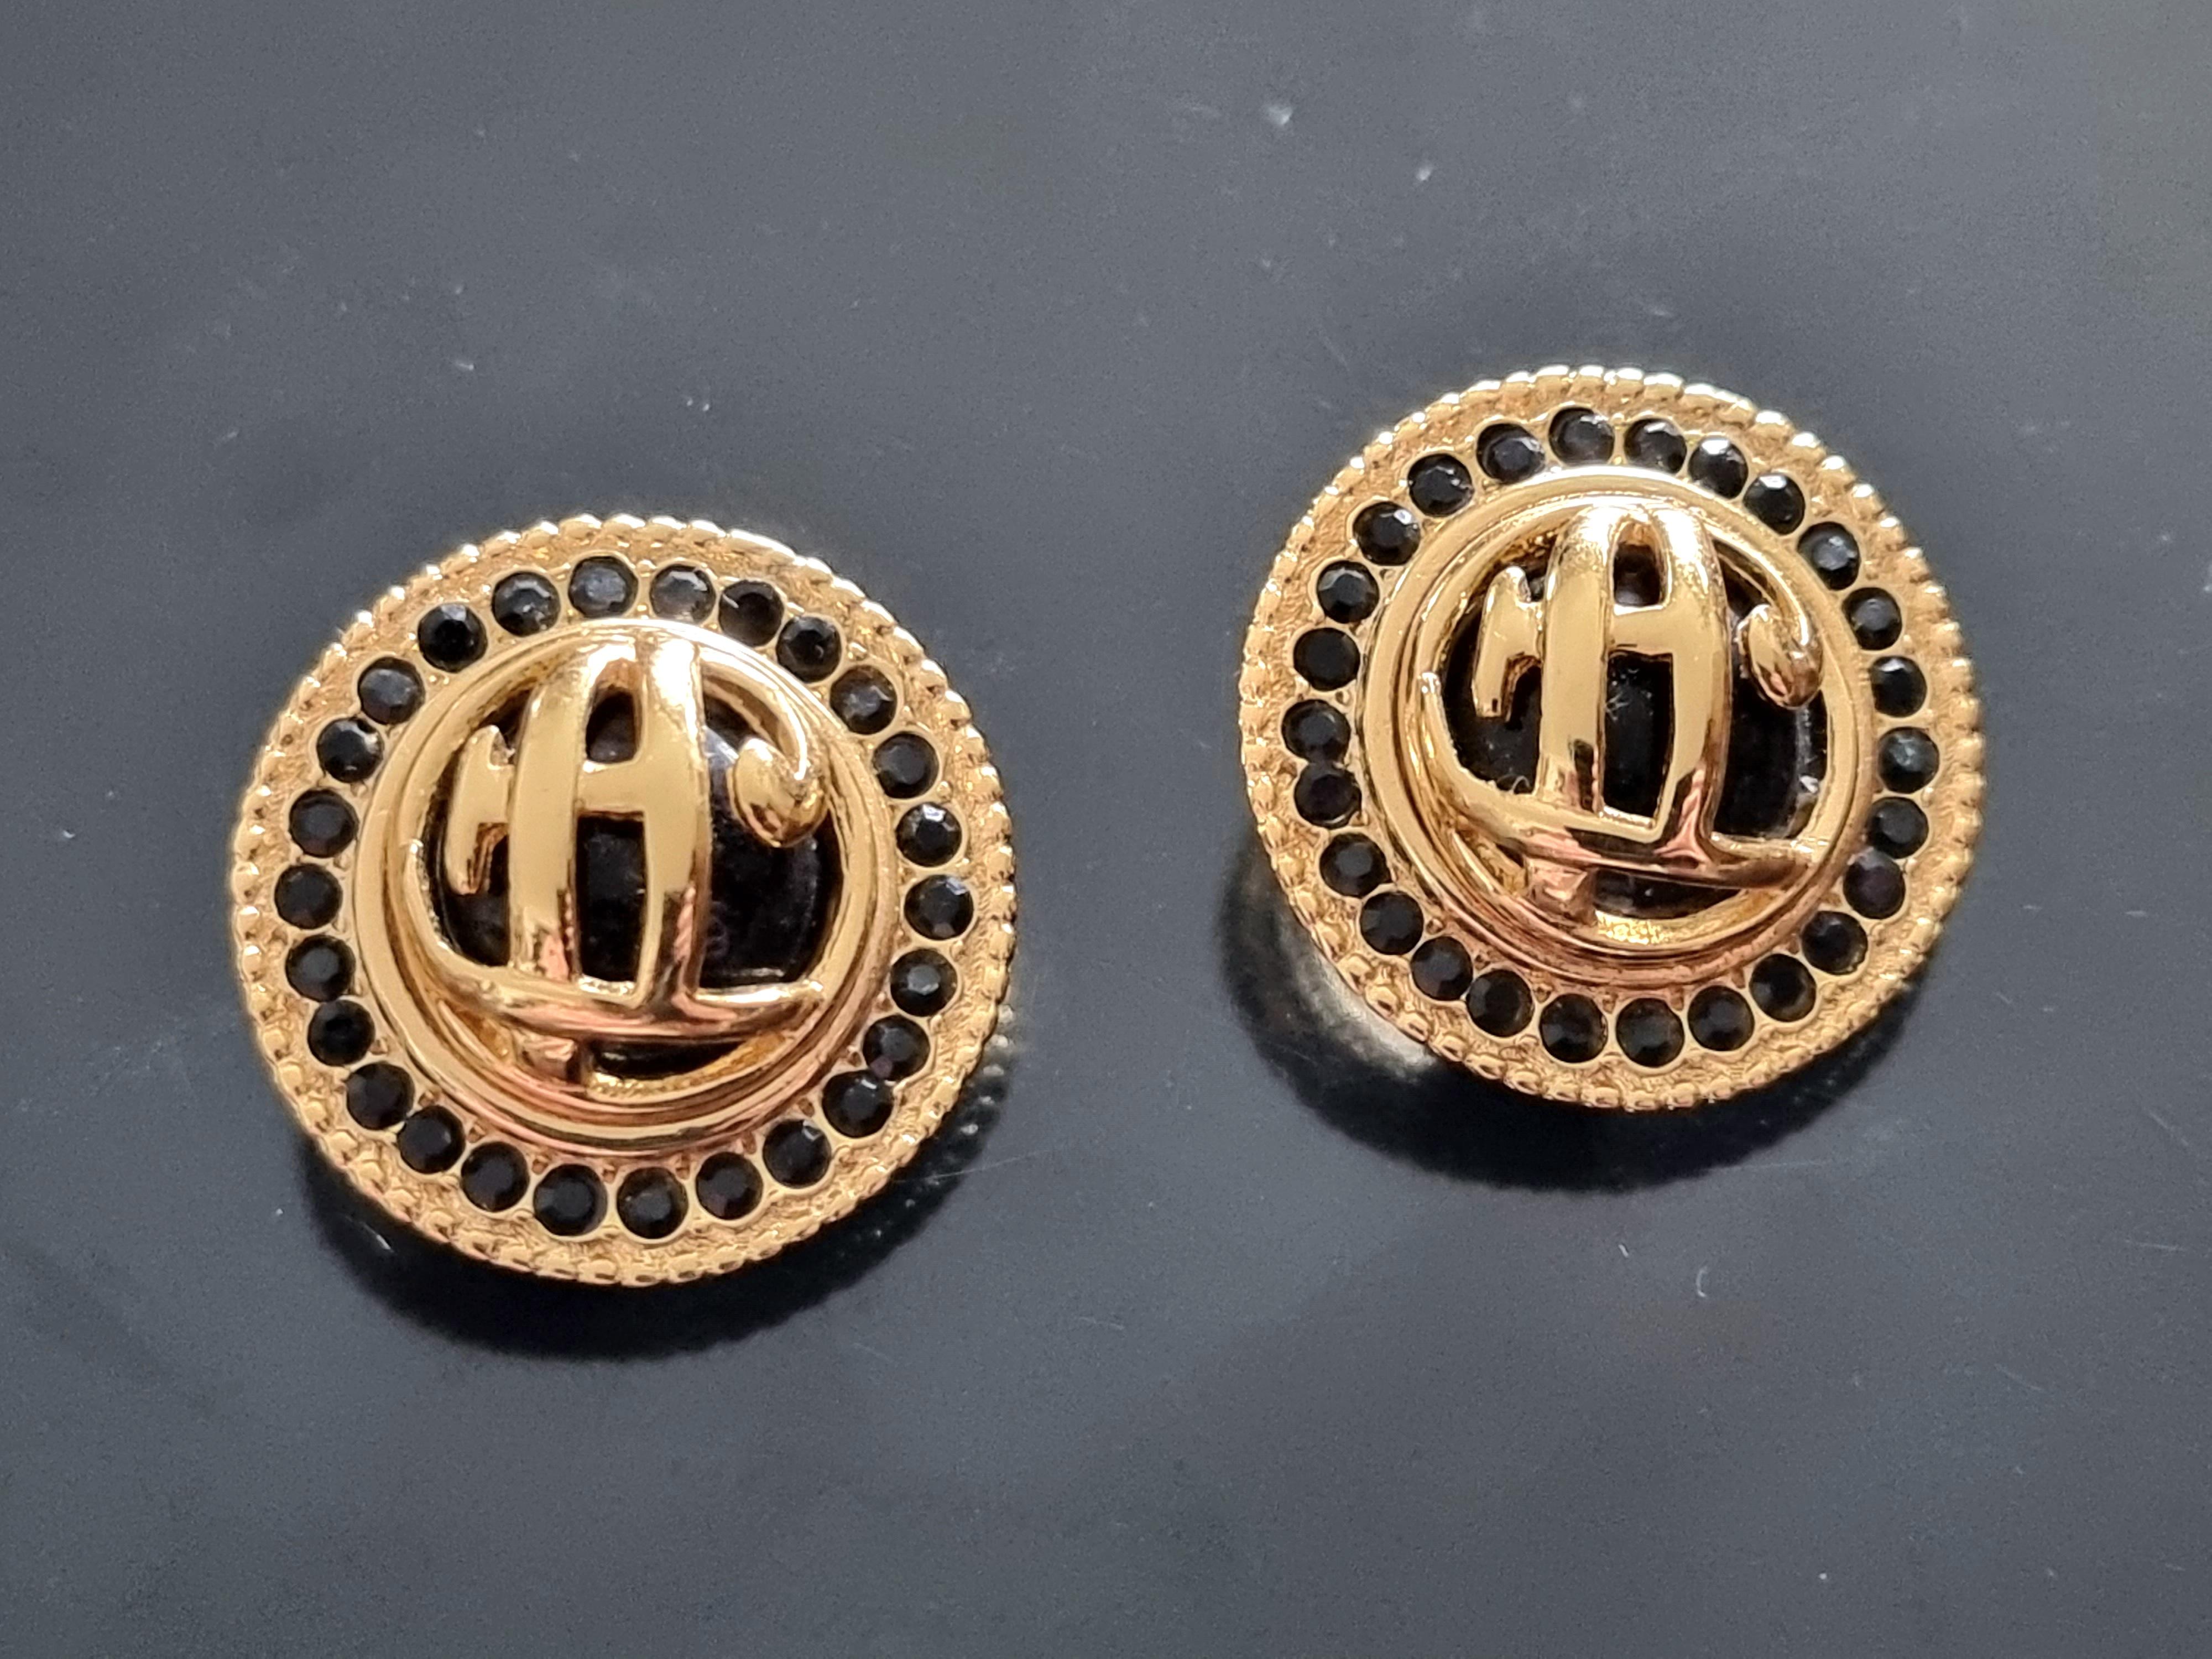 Clip On Earrings,
vintage,
signed,
Haute Couture designer Jacques FATH,
diameter 3 cm, weight 1 x 14 g,
very good state.

Jacques Fath, born September 6, 1912 in Maisons-Laffitte and died November 13, 1954 in Paris, is a great French couturier